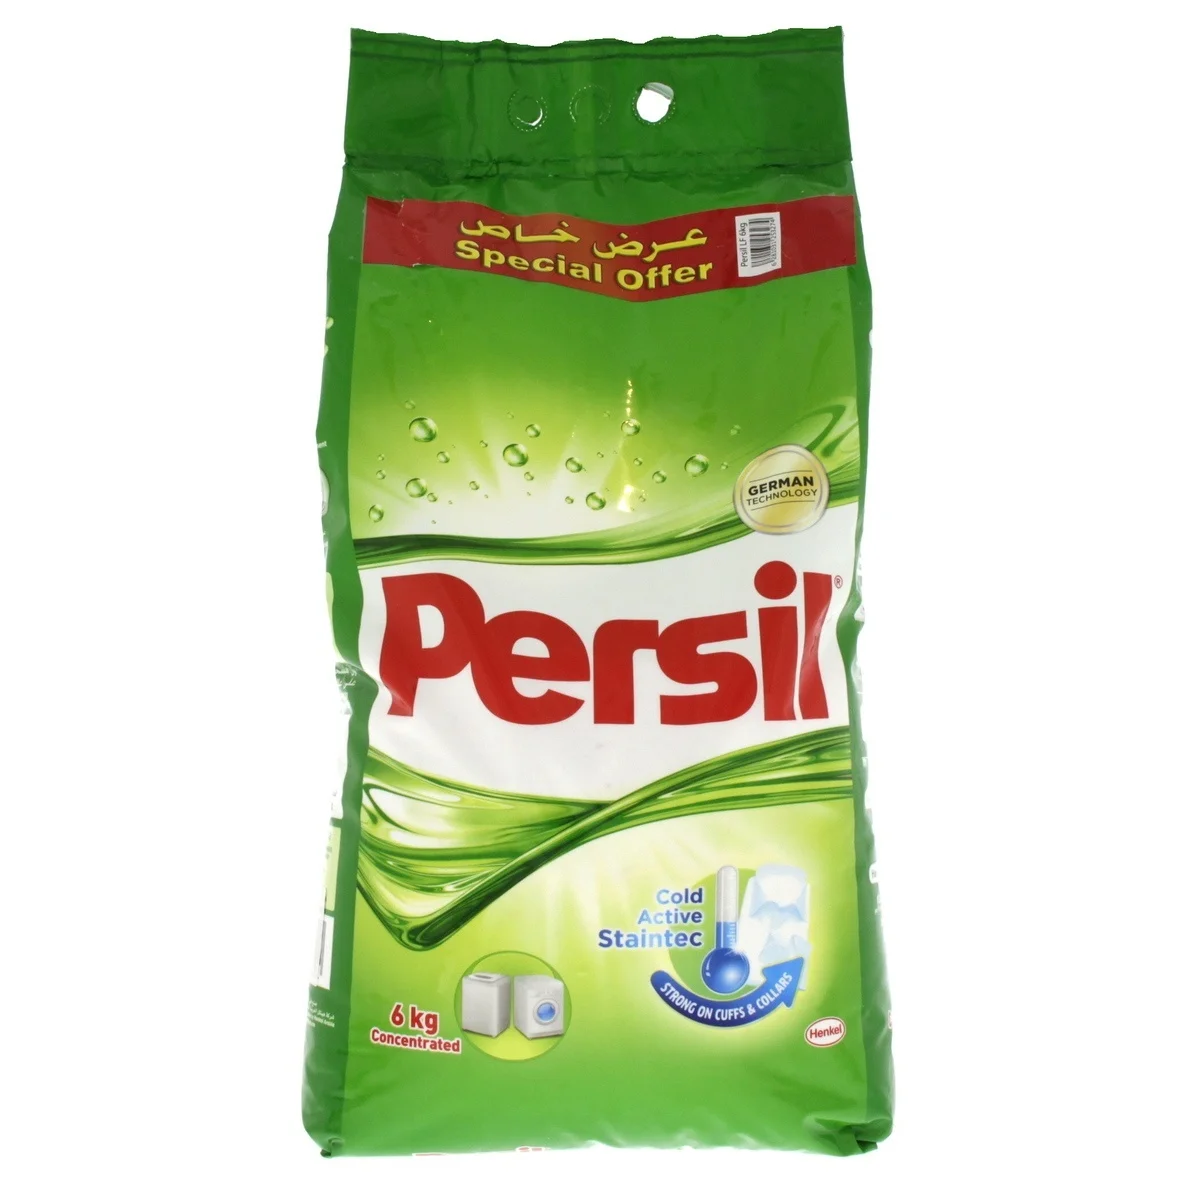 Hot Selling Persil Washing Powder For laundry And Cleaning In Stock (1600454096182)